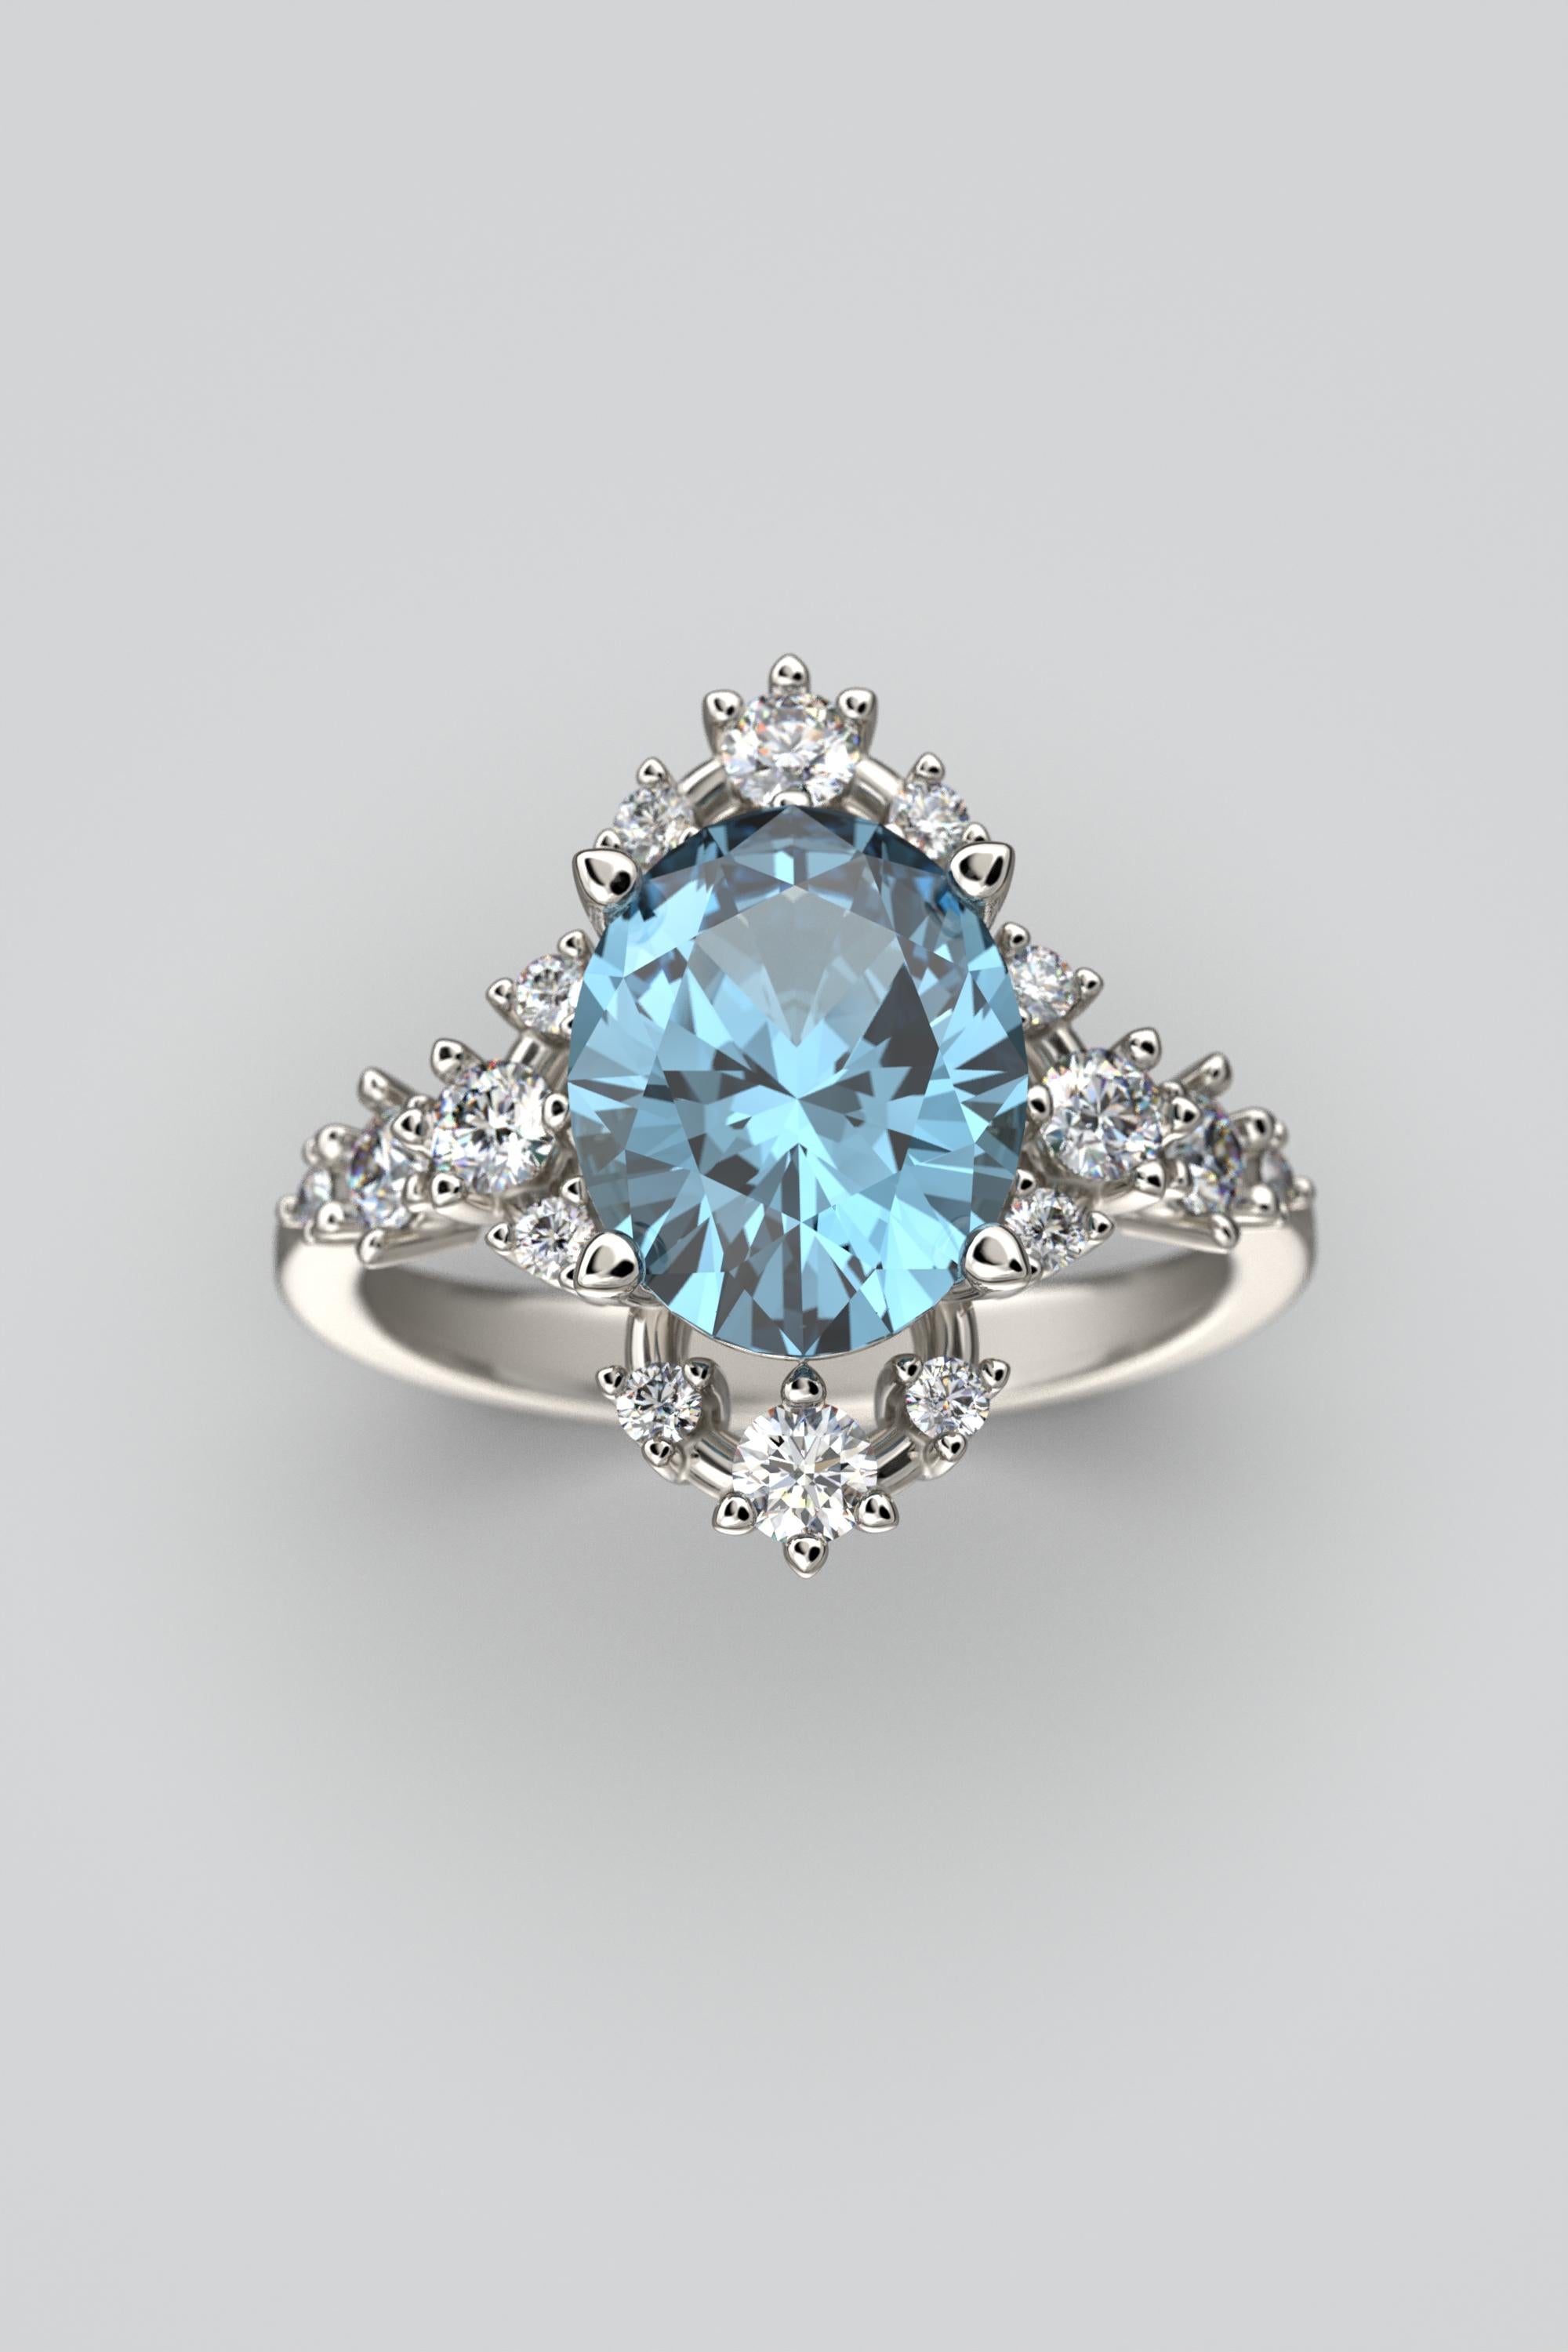 For Sale:  18k Gold Aquamarine Ring With Natural Diamonds Made in Italy Oltremare Gioielli 3